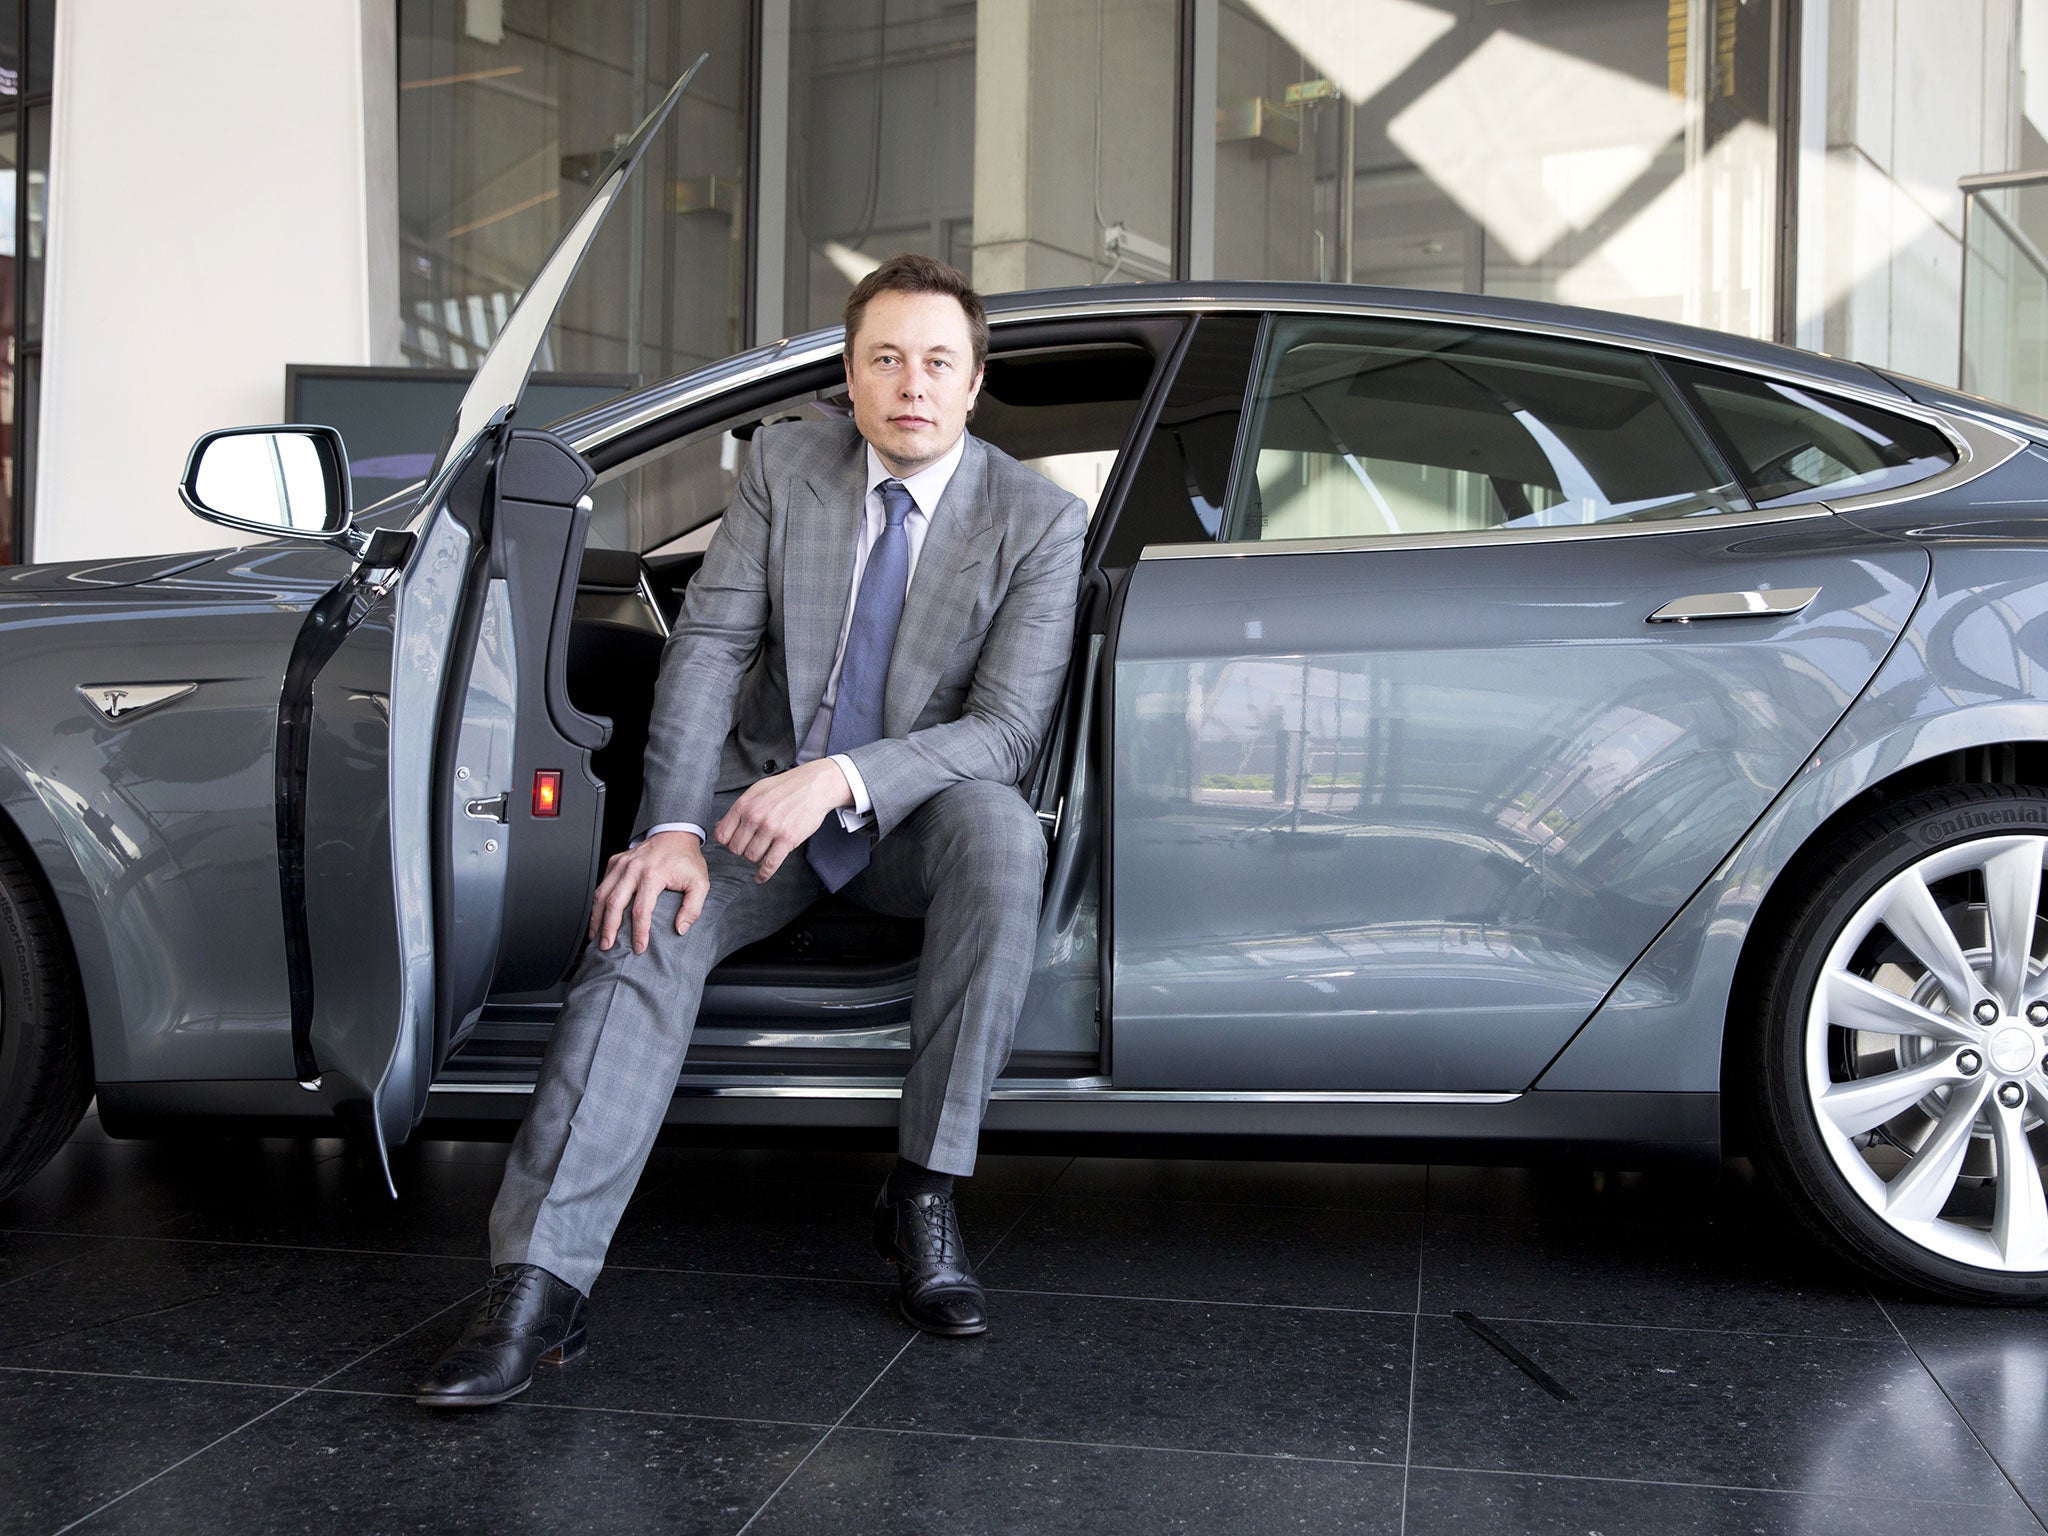 Elon Musk, the chief executive of Tesla Motors, at the launch of the Model S
electric sports car in the UK last week